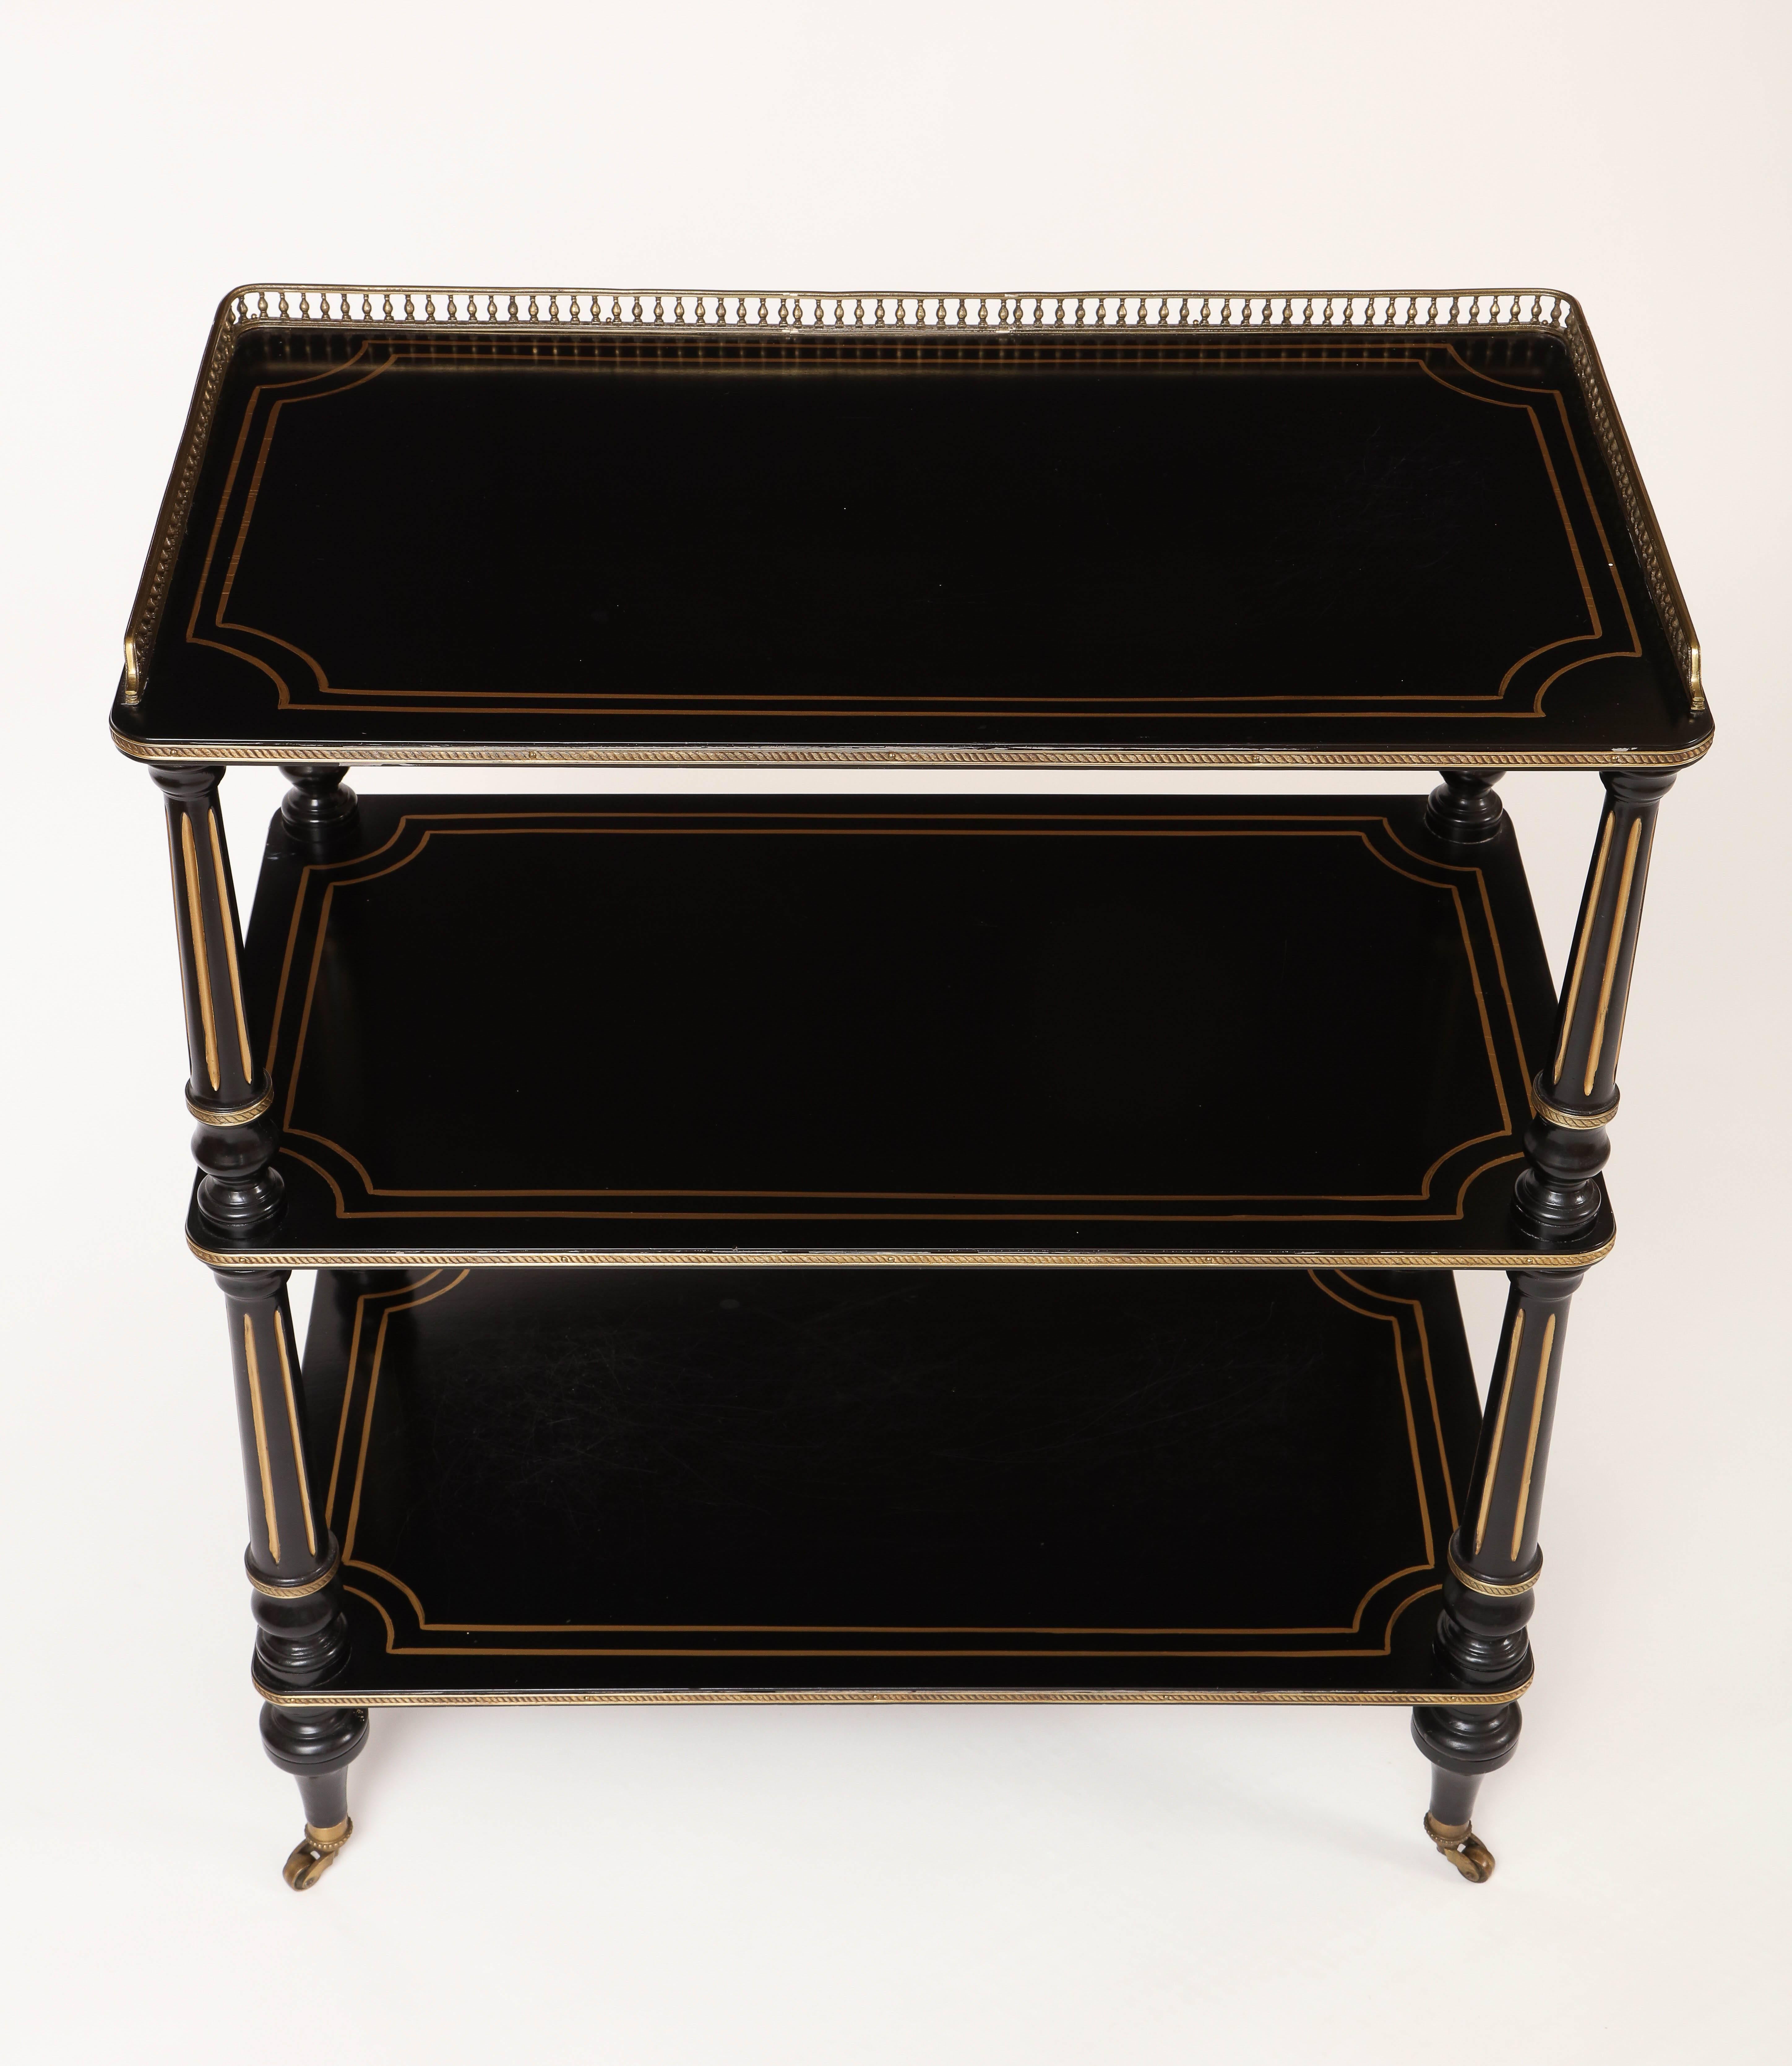 This English three-tiered étagère is made of ebonized wood with parcel gilded details and gilded bronze mounts, all in the Napoleon III taste.